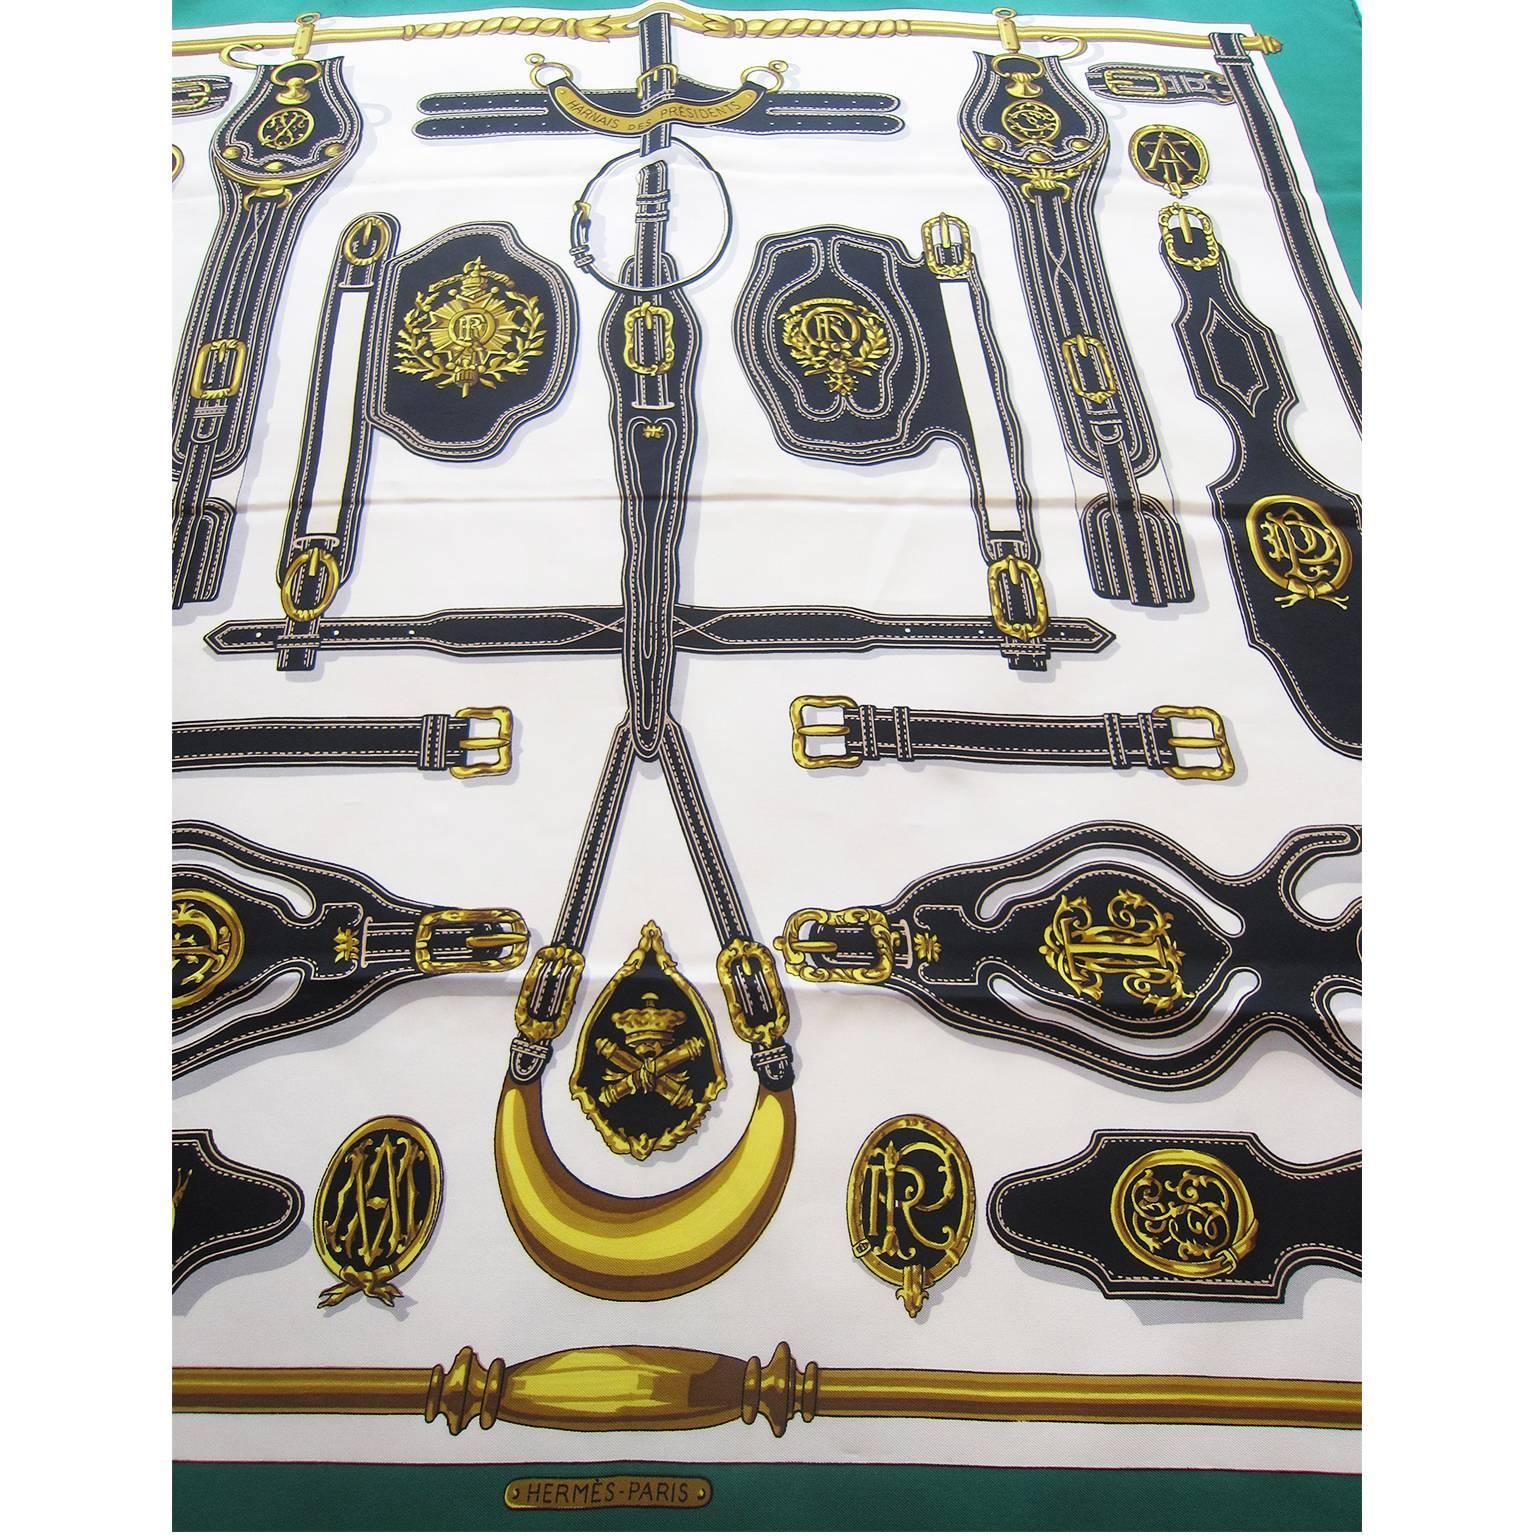 Vintage Hermes silk carré in excellent condition designed by Designed by Francoise Heron. Iconic Harnais des Présidents print in bright green black and gold.

Measurements : circa 90 cm x 90 cm